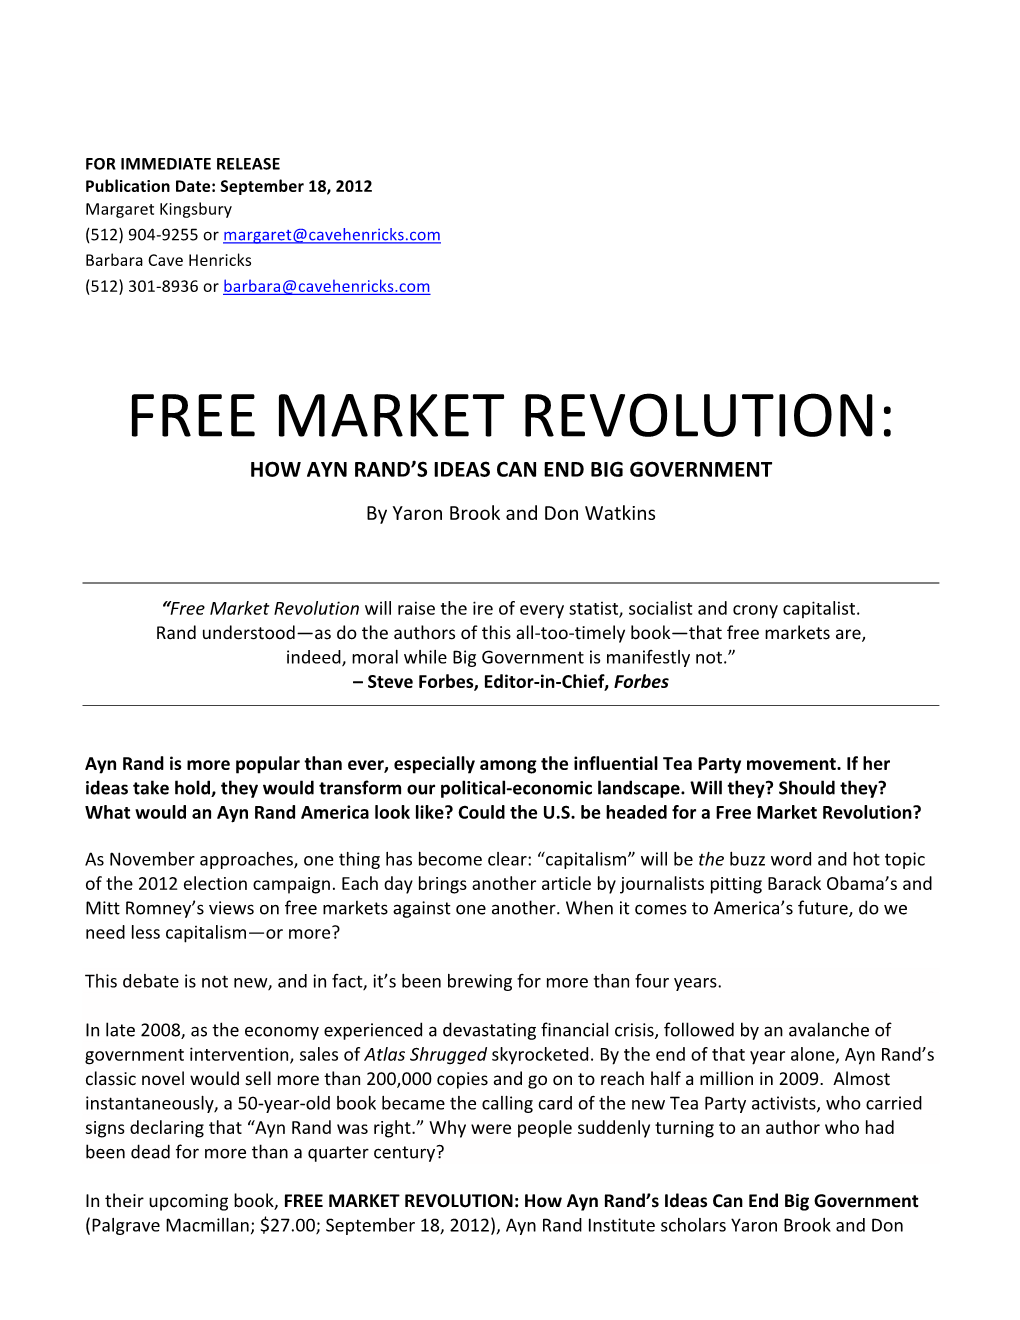 Free Market Revolution: How Ayn Rand’S Ideas Can End Big Government